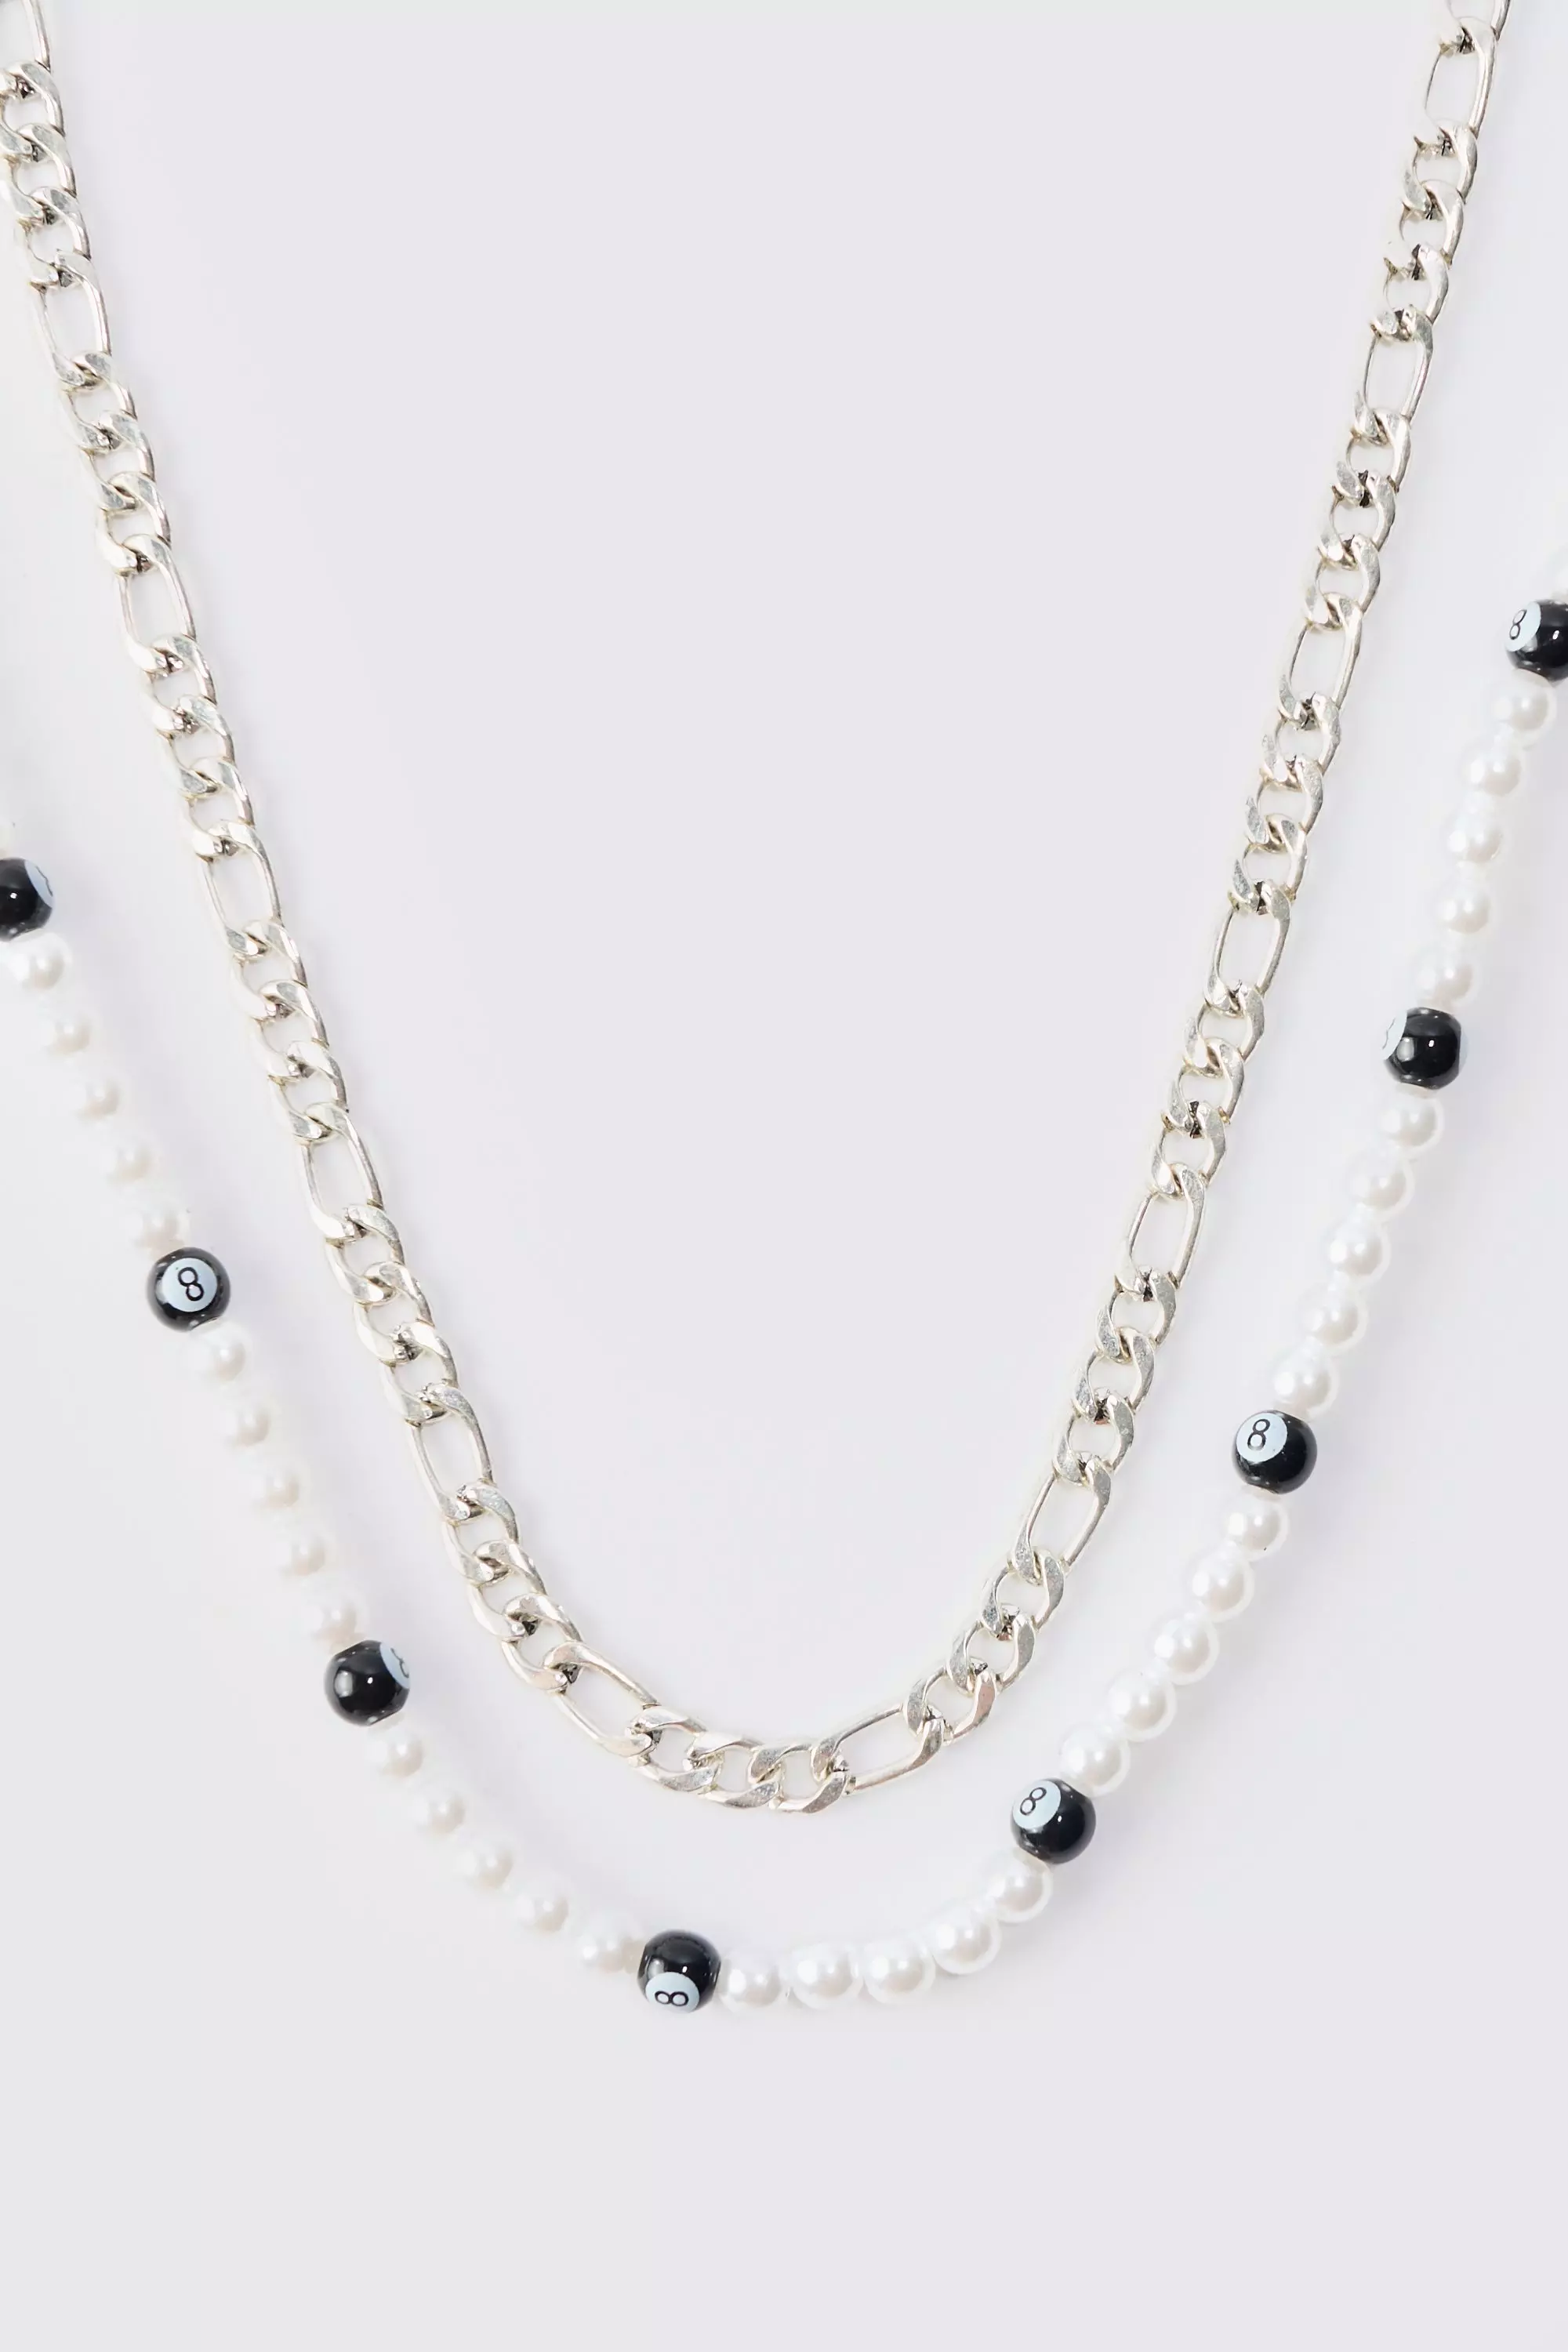 8 Ball Multilayer Necklace Silver